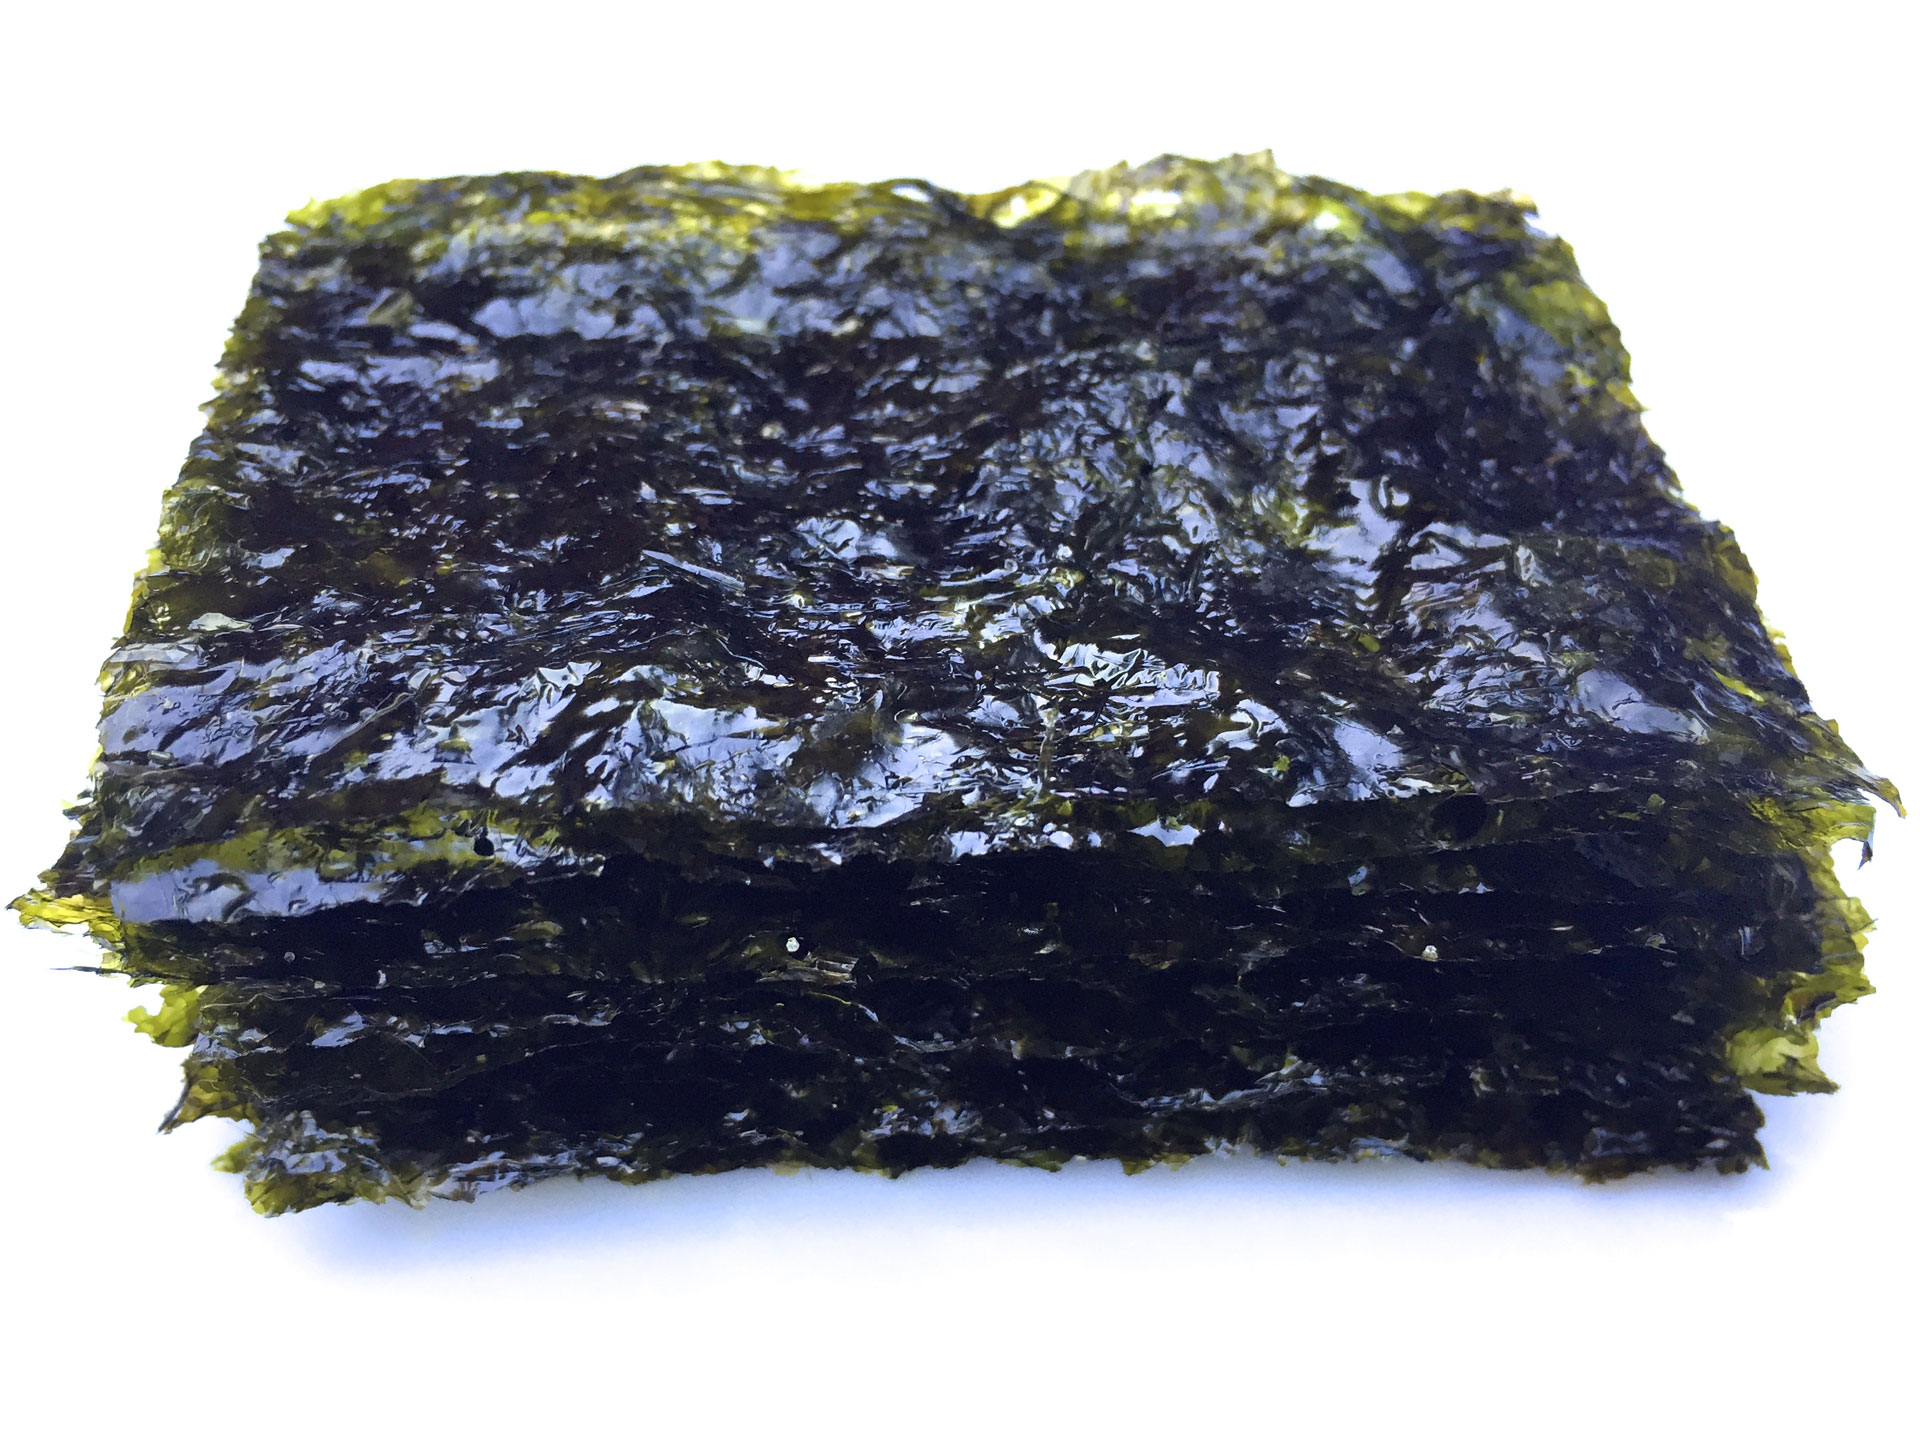 Roasted nori cut into snack sized sheets